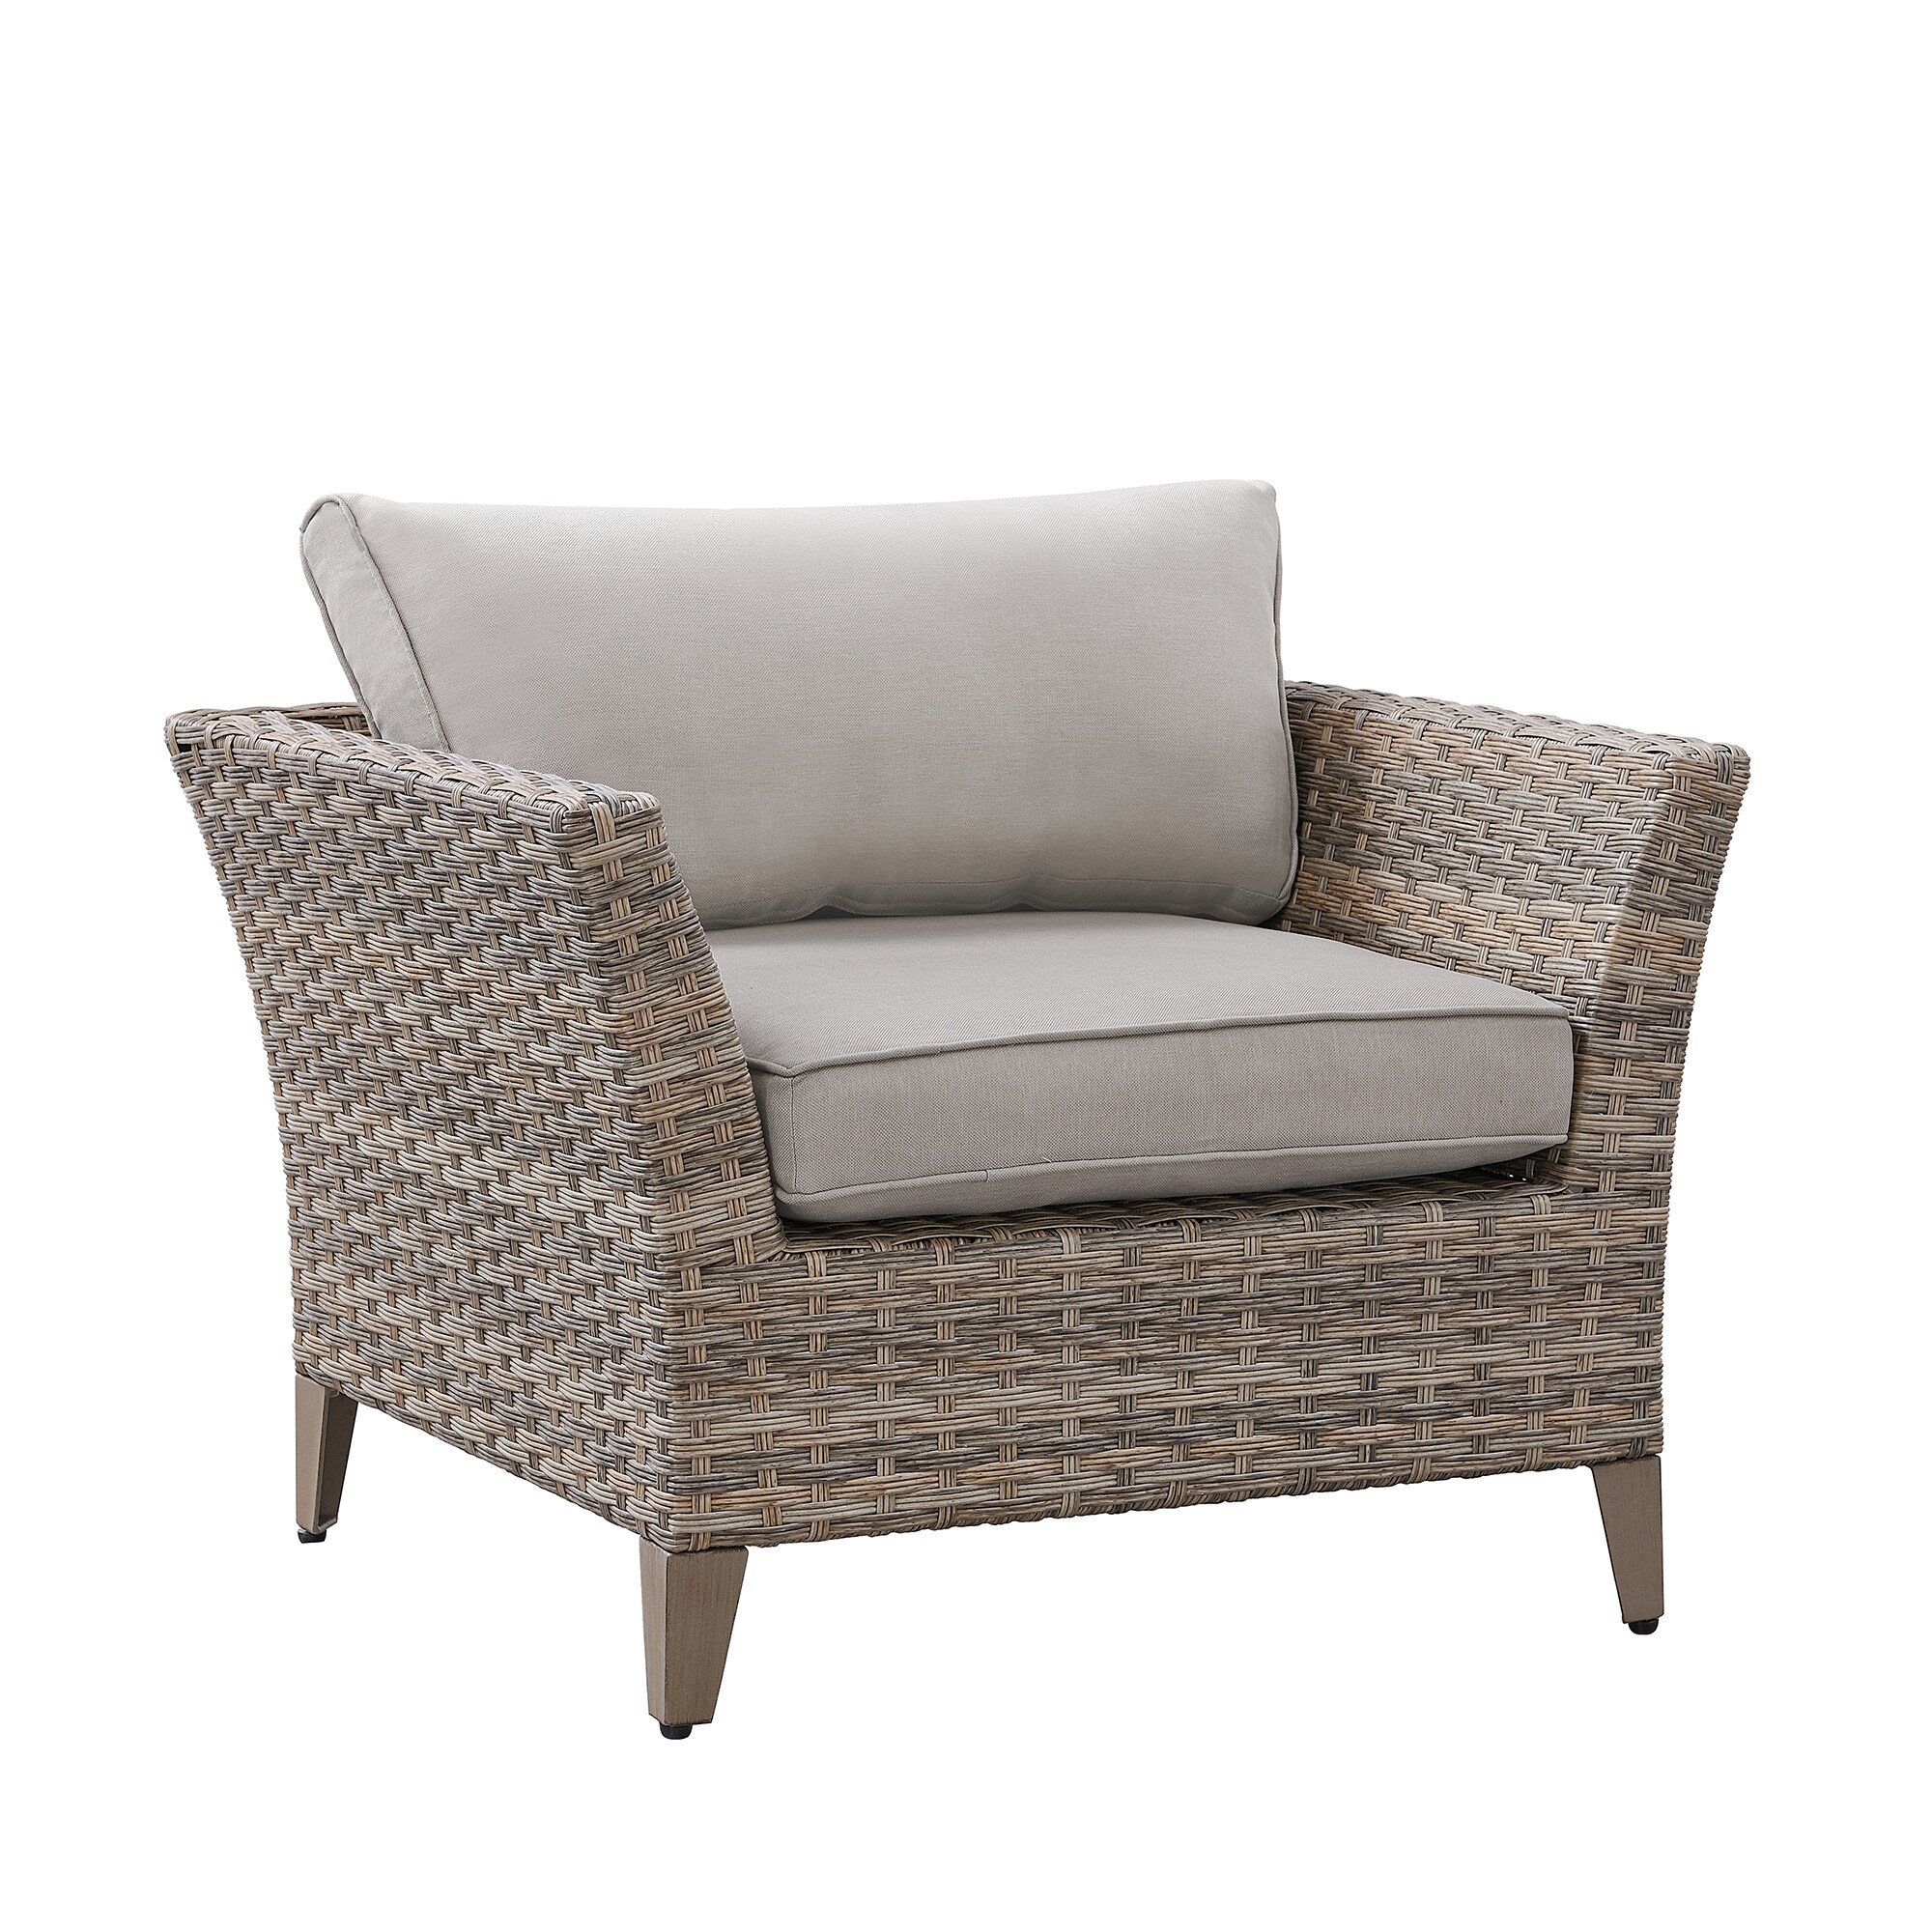 Martha Stewart Broxton Set Of 2 Wicker Wood Look Brown Metal Frame  Stationary Conversation Chair(S) With Tan Olefin Cushioned Seat In The  Patio Chairs Department At Lowes.com